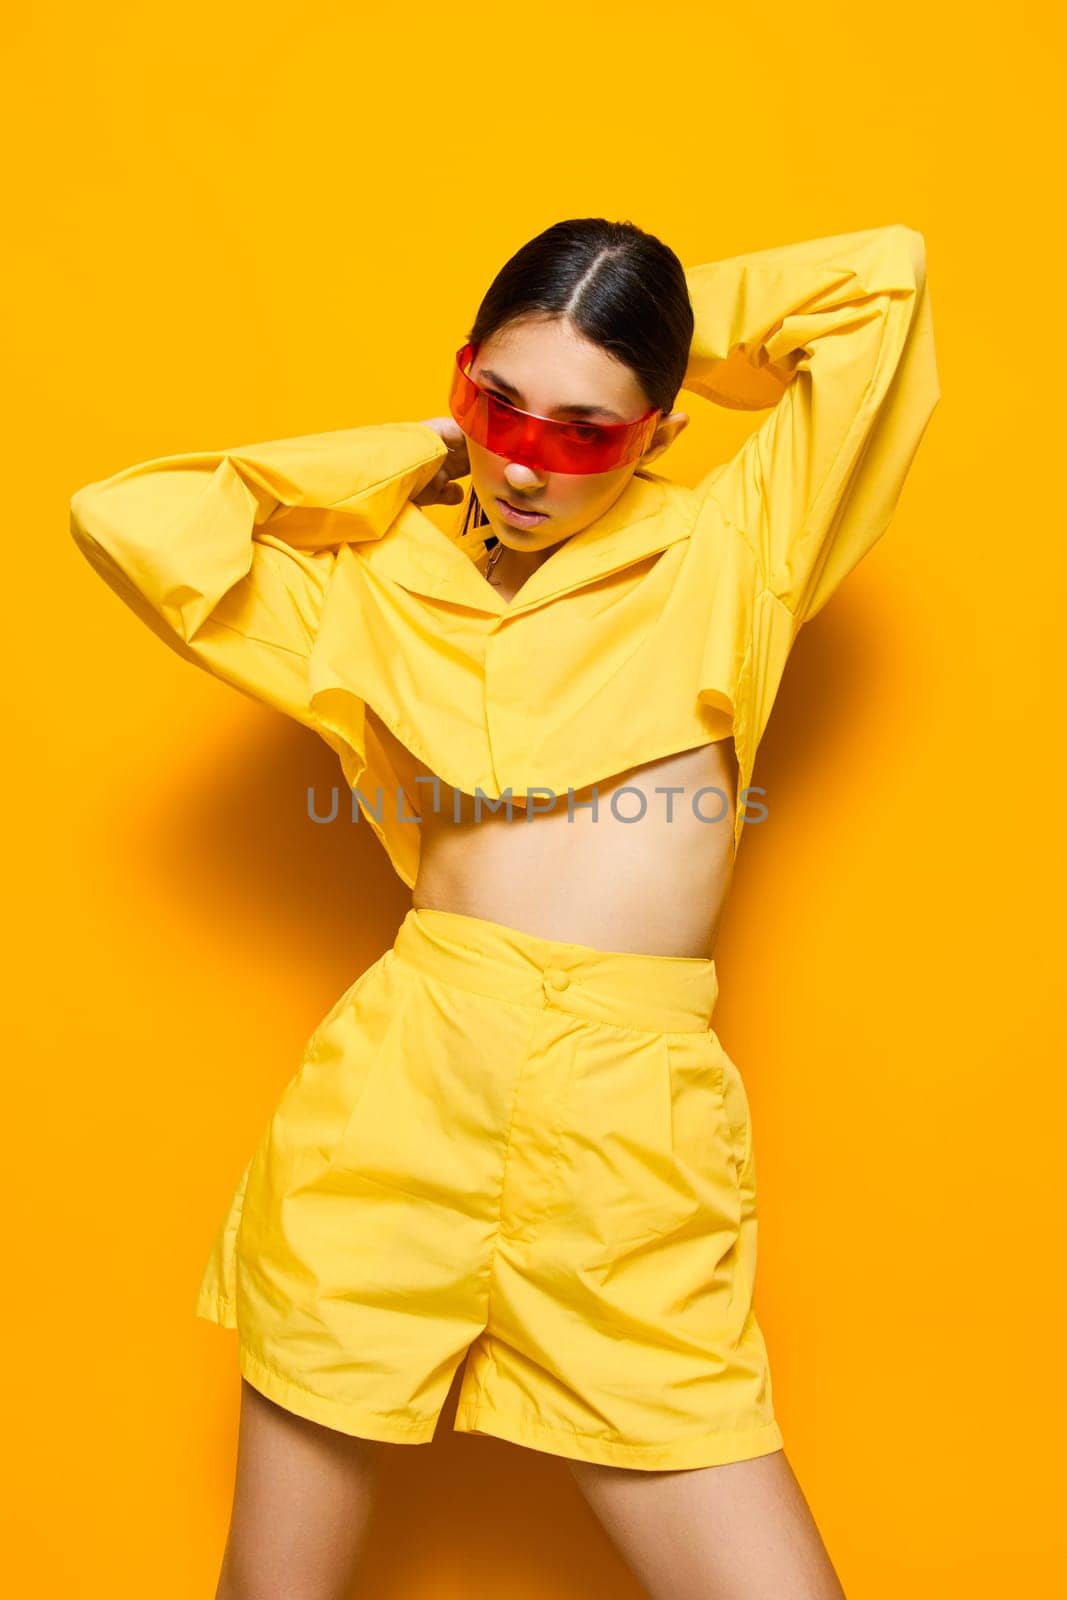 woman fashion beautiful hairstyle girl lifestyle lady glasses happiness model style fun emotion creative sunglasses trendy stylish attractive young outfit yellow